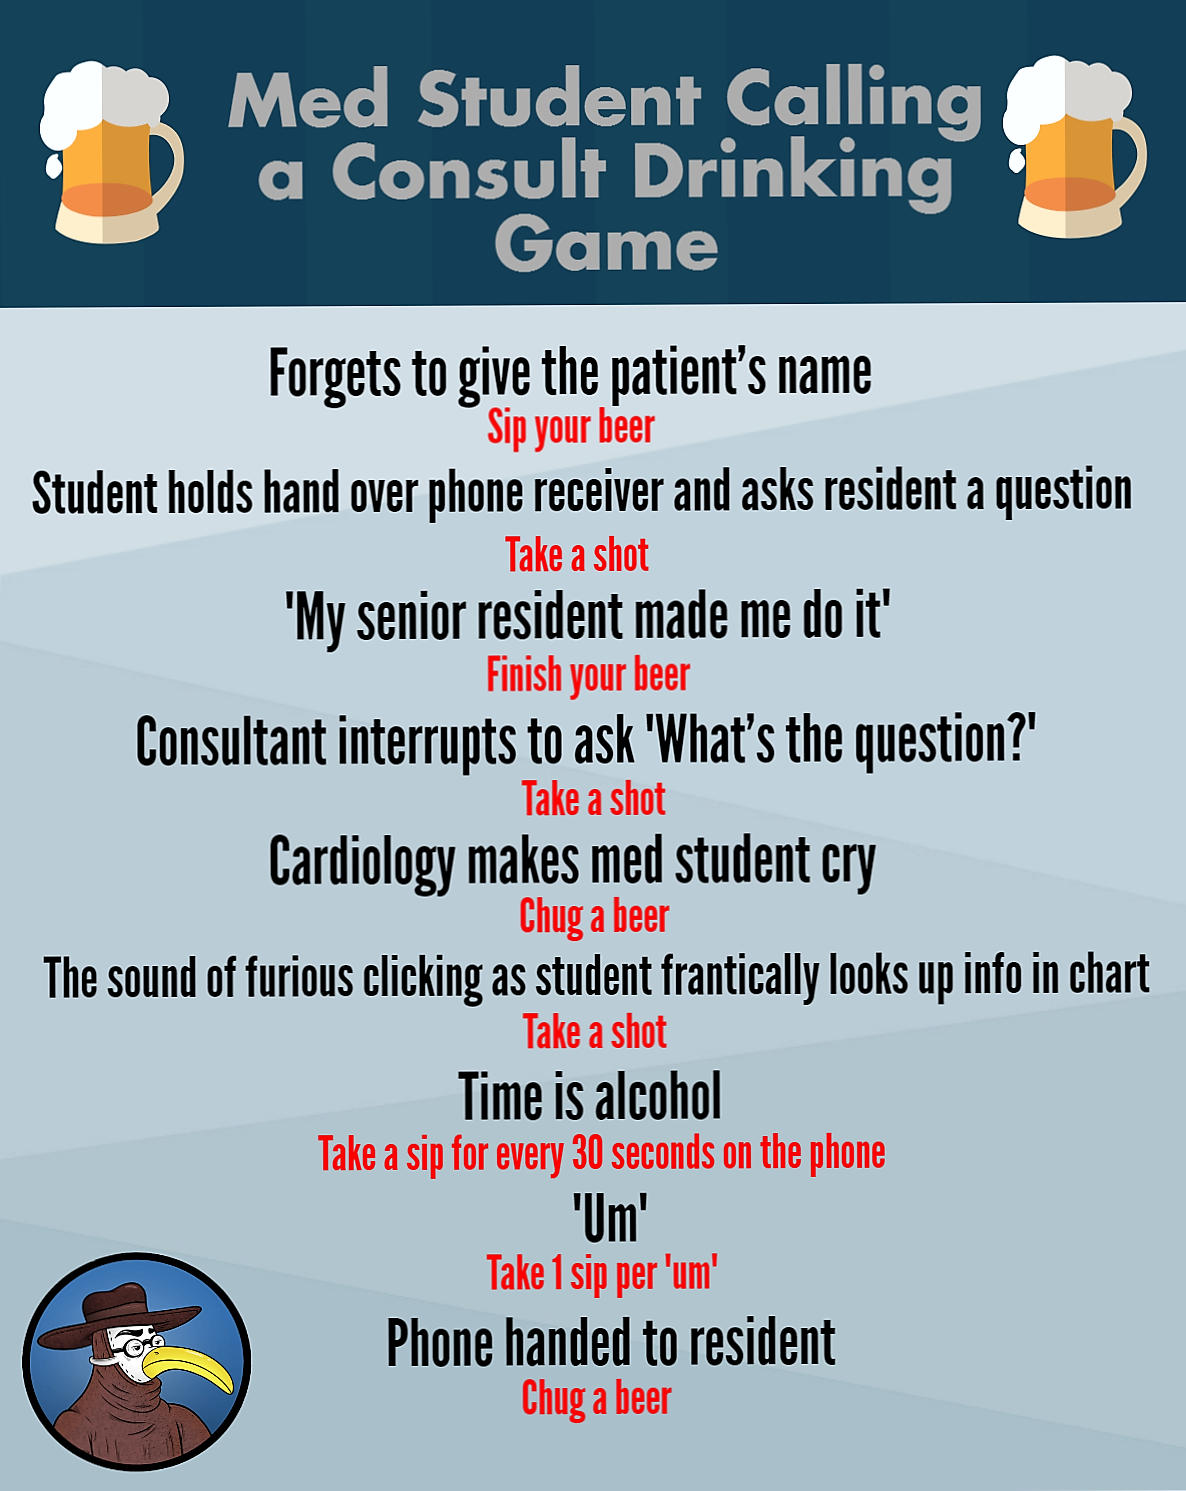 Med Student Calling a Consult Drinking Game